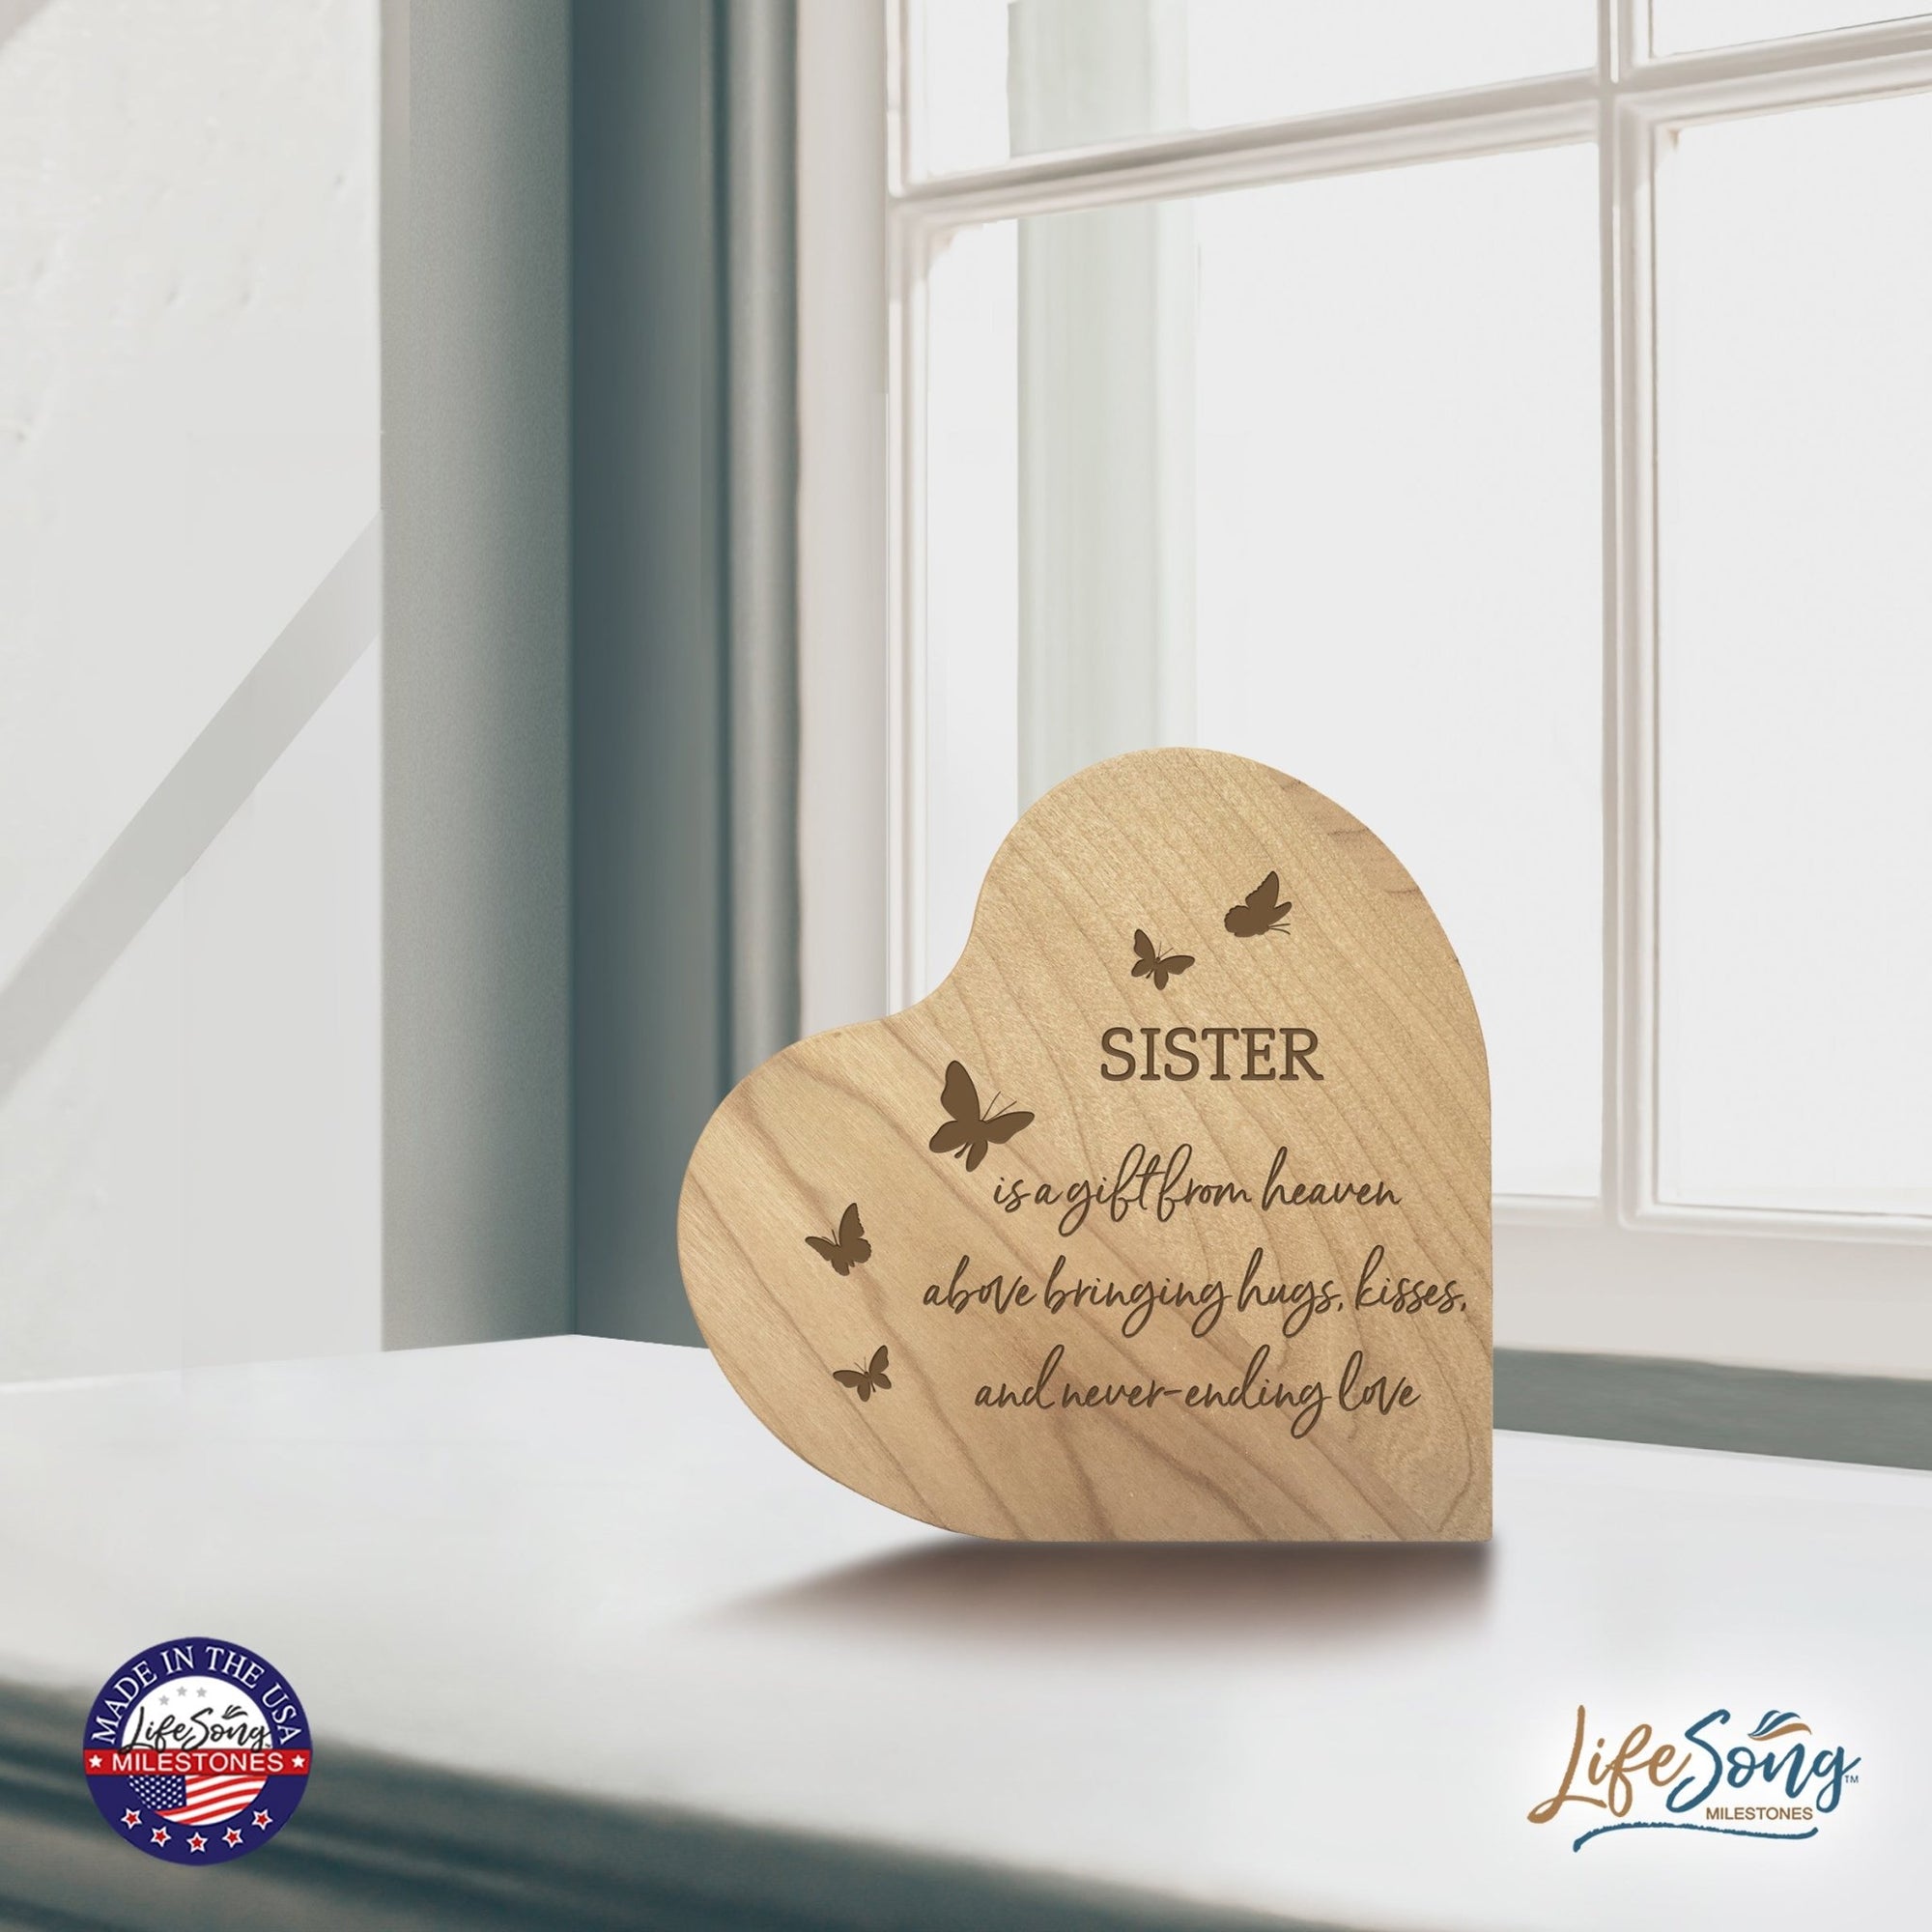 Modern Sister’s Love Wooden Solid Wood Heart Decoration With Inspirational Verse 5x5.25 - Sister Is A Gift From = Never-Ending Love - LifeSong Milestones